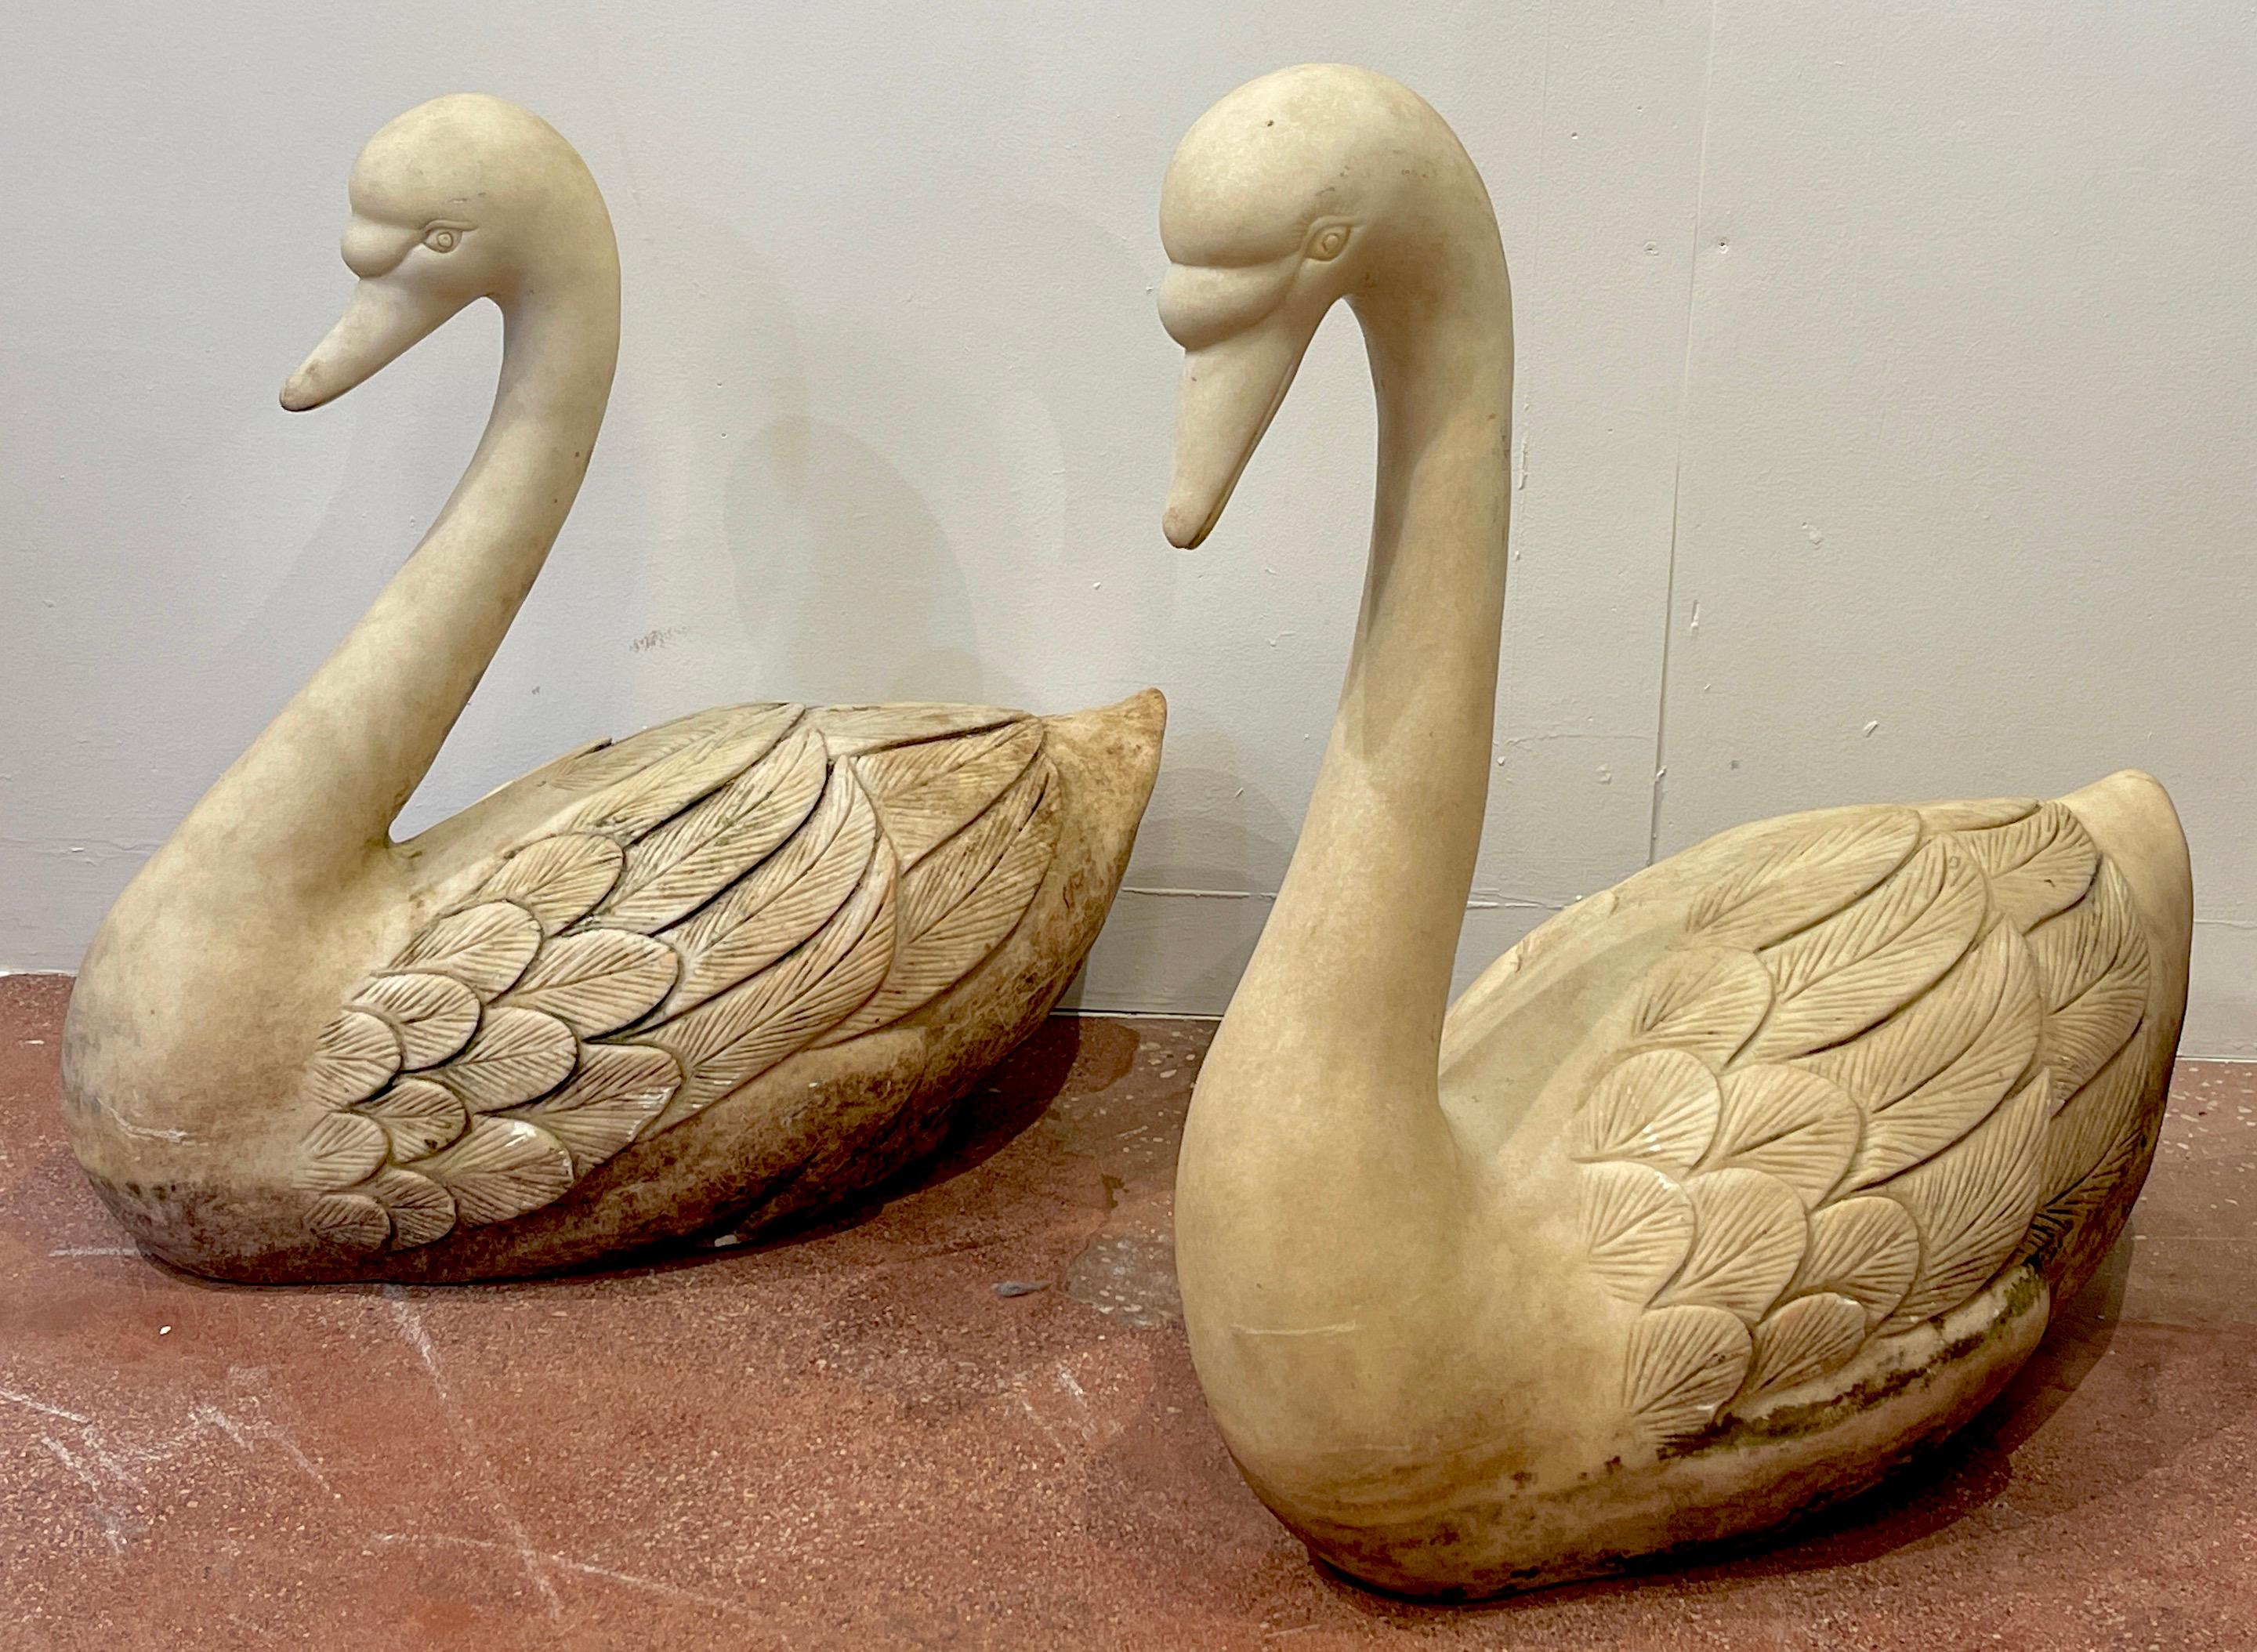 Pair of life size carved marble garden swans, Italy, C 1920
Each one realistically carved and modeled as swimming swans, one with its neck angled, the other swimming upright. The sculptures can be used in a shallow water feature, garden, terrace or